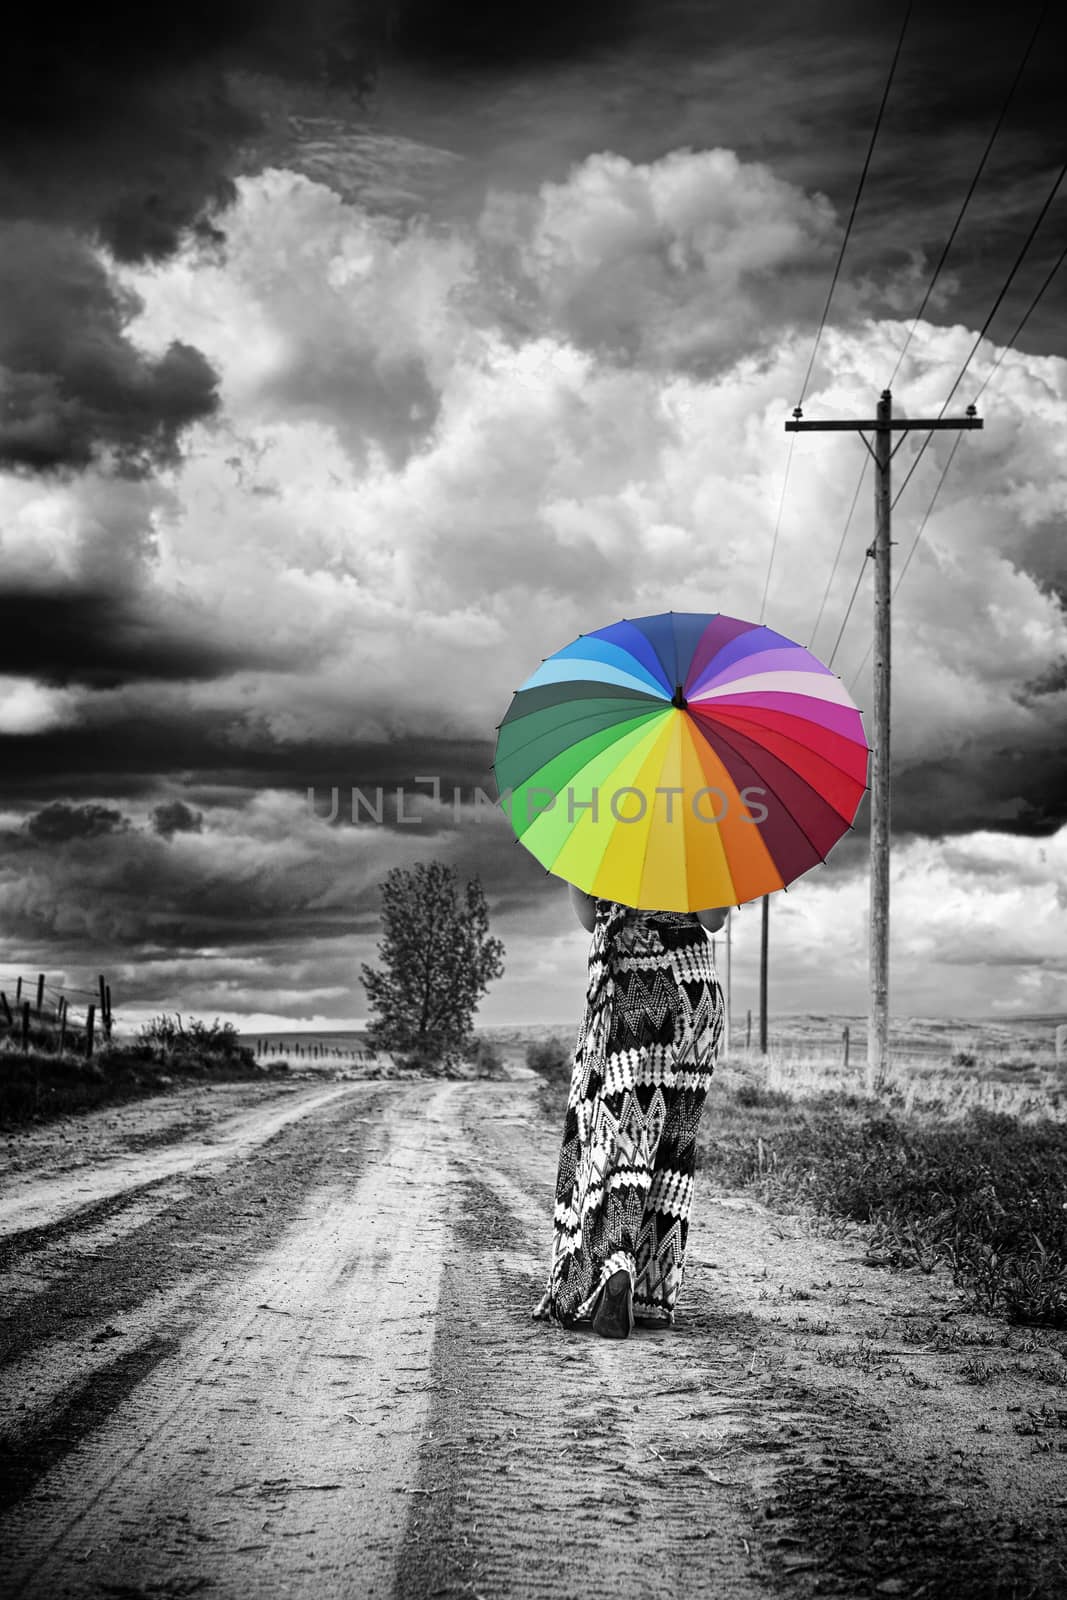 A woman walks alone along, an old dirt road with ominous clouds above.  Gritty black and white with selective color.